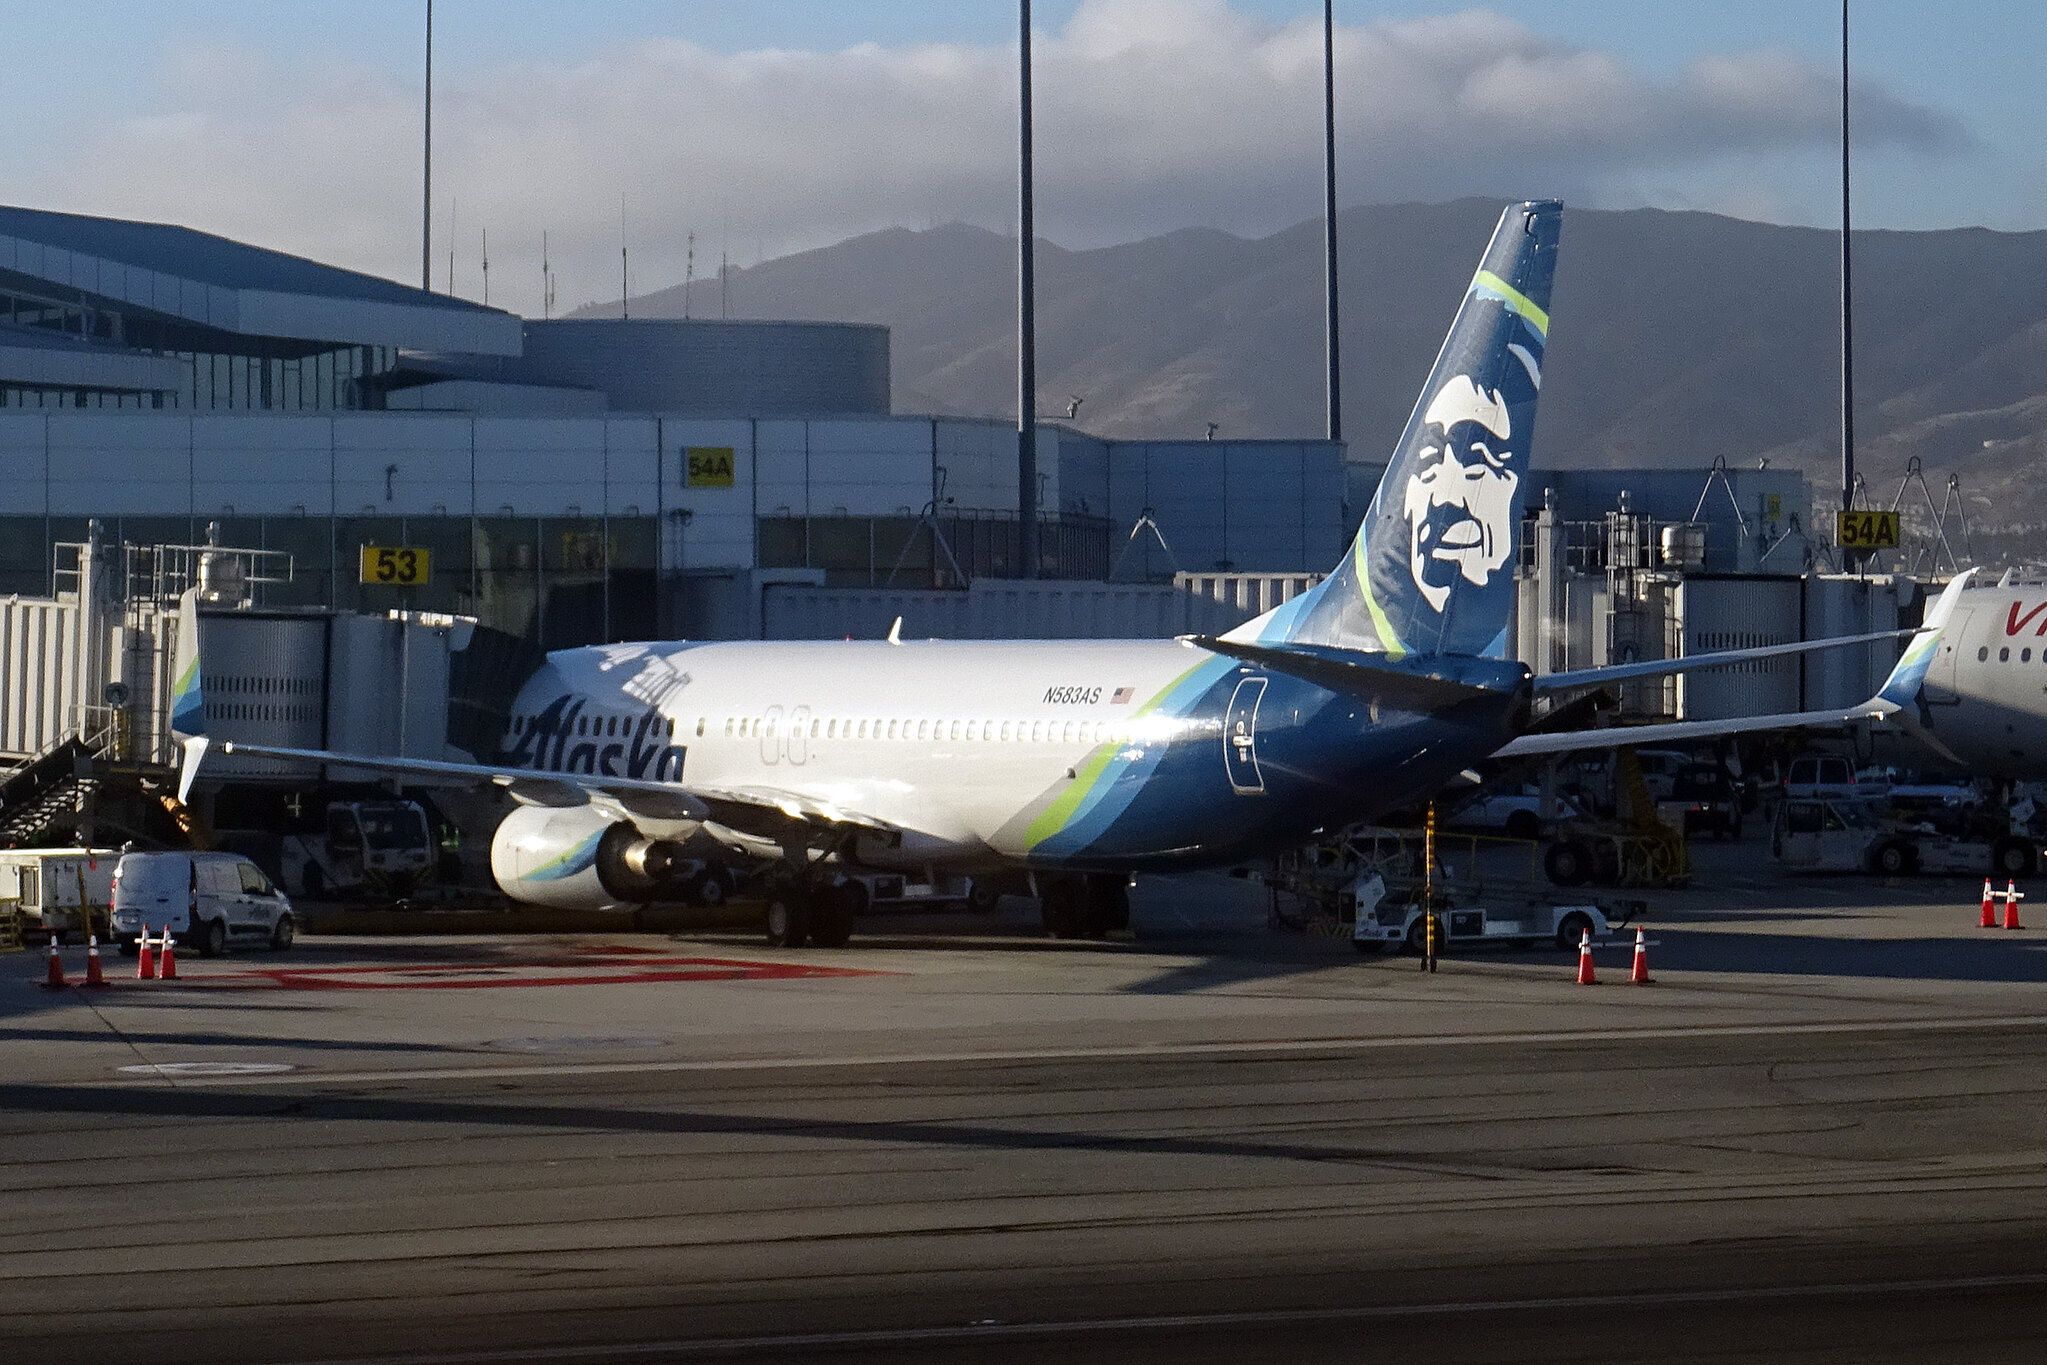 N583AS at SFO Gate in latest Alaska Airlines livery